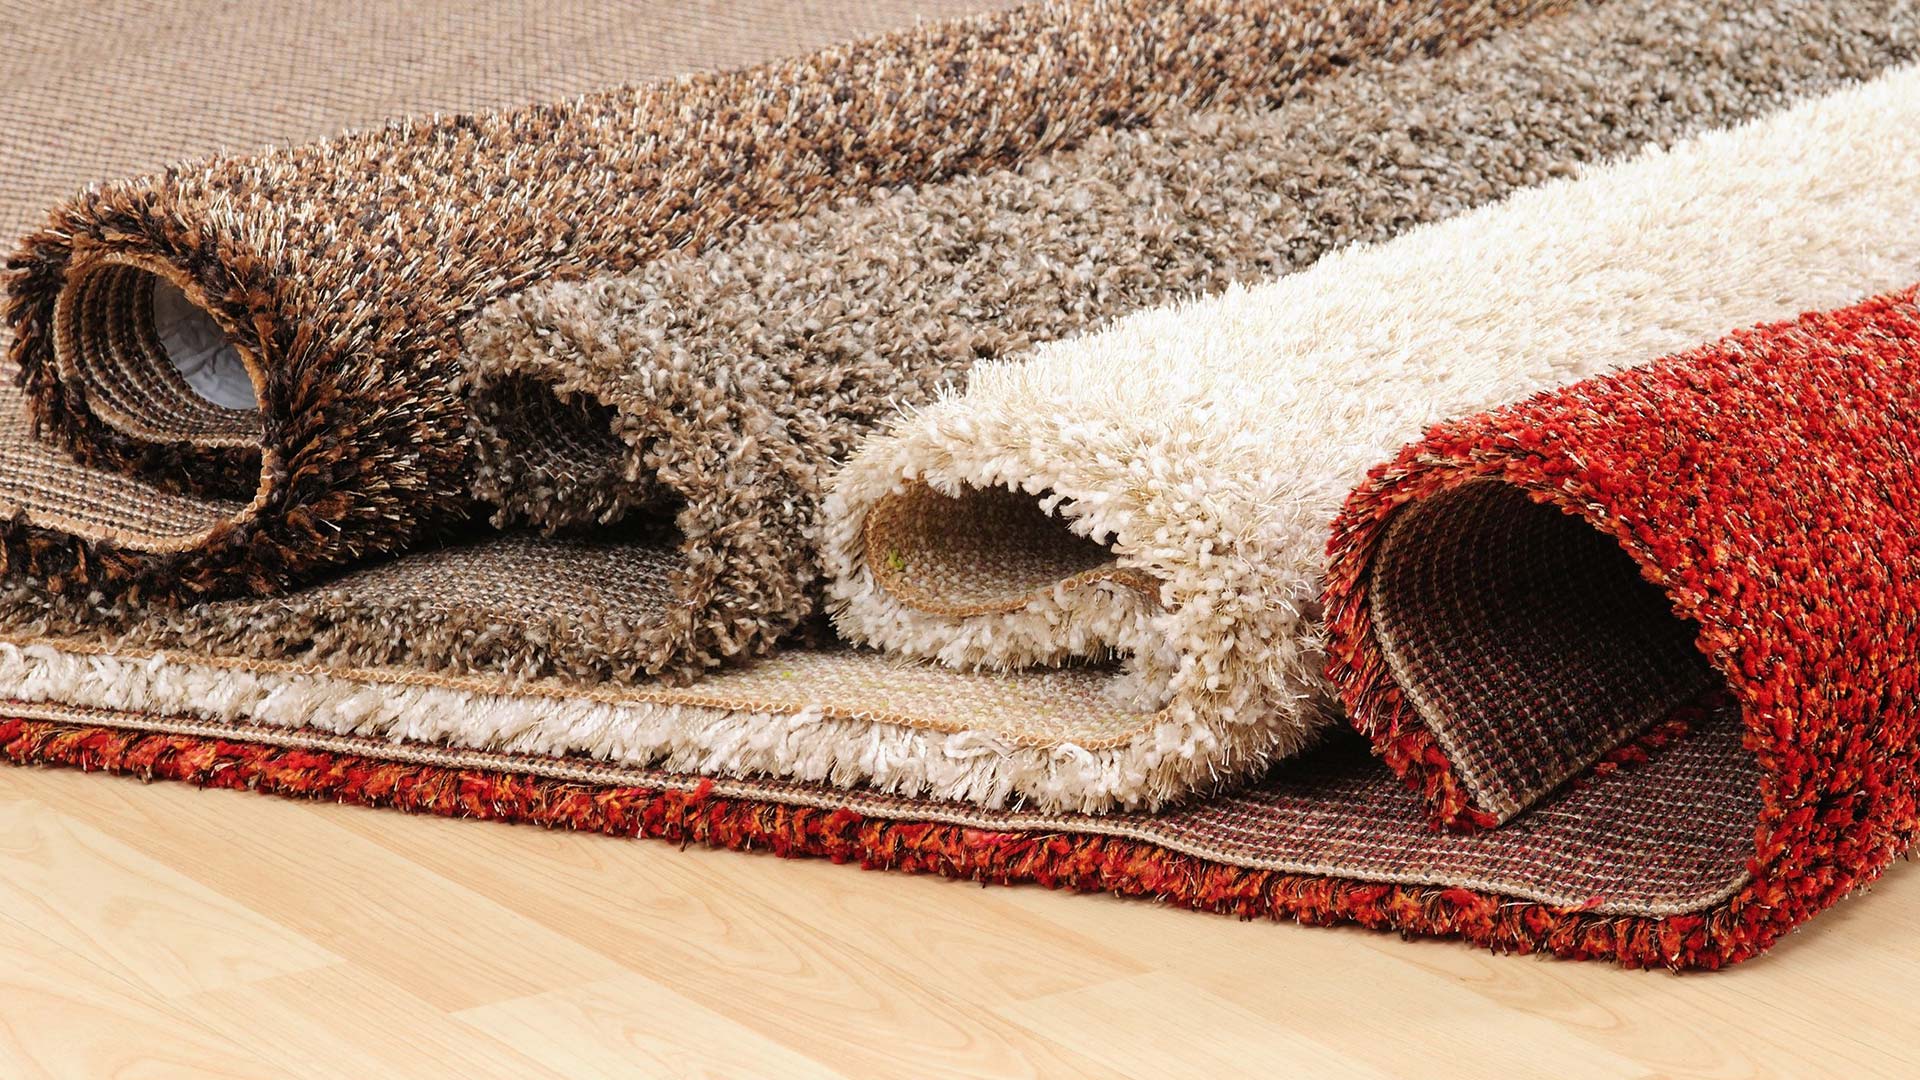 Carpet flooring - All styles and colors